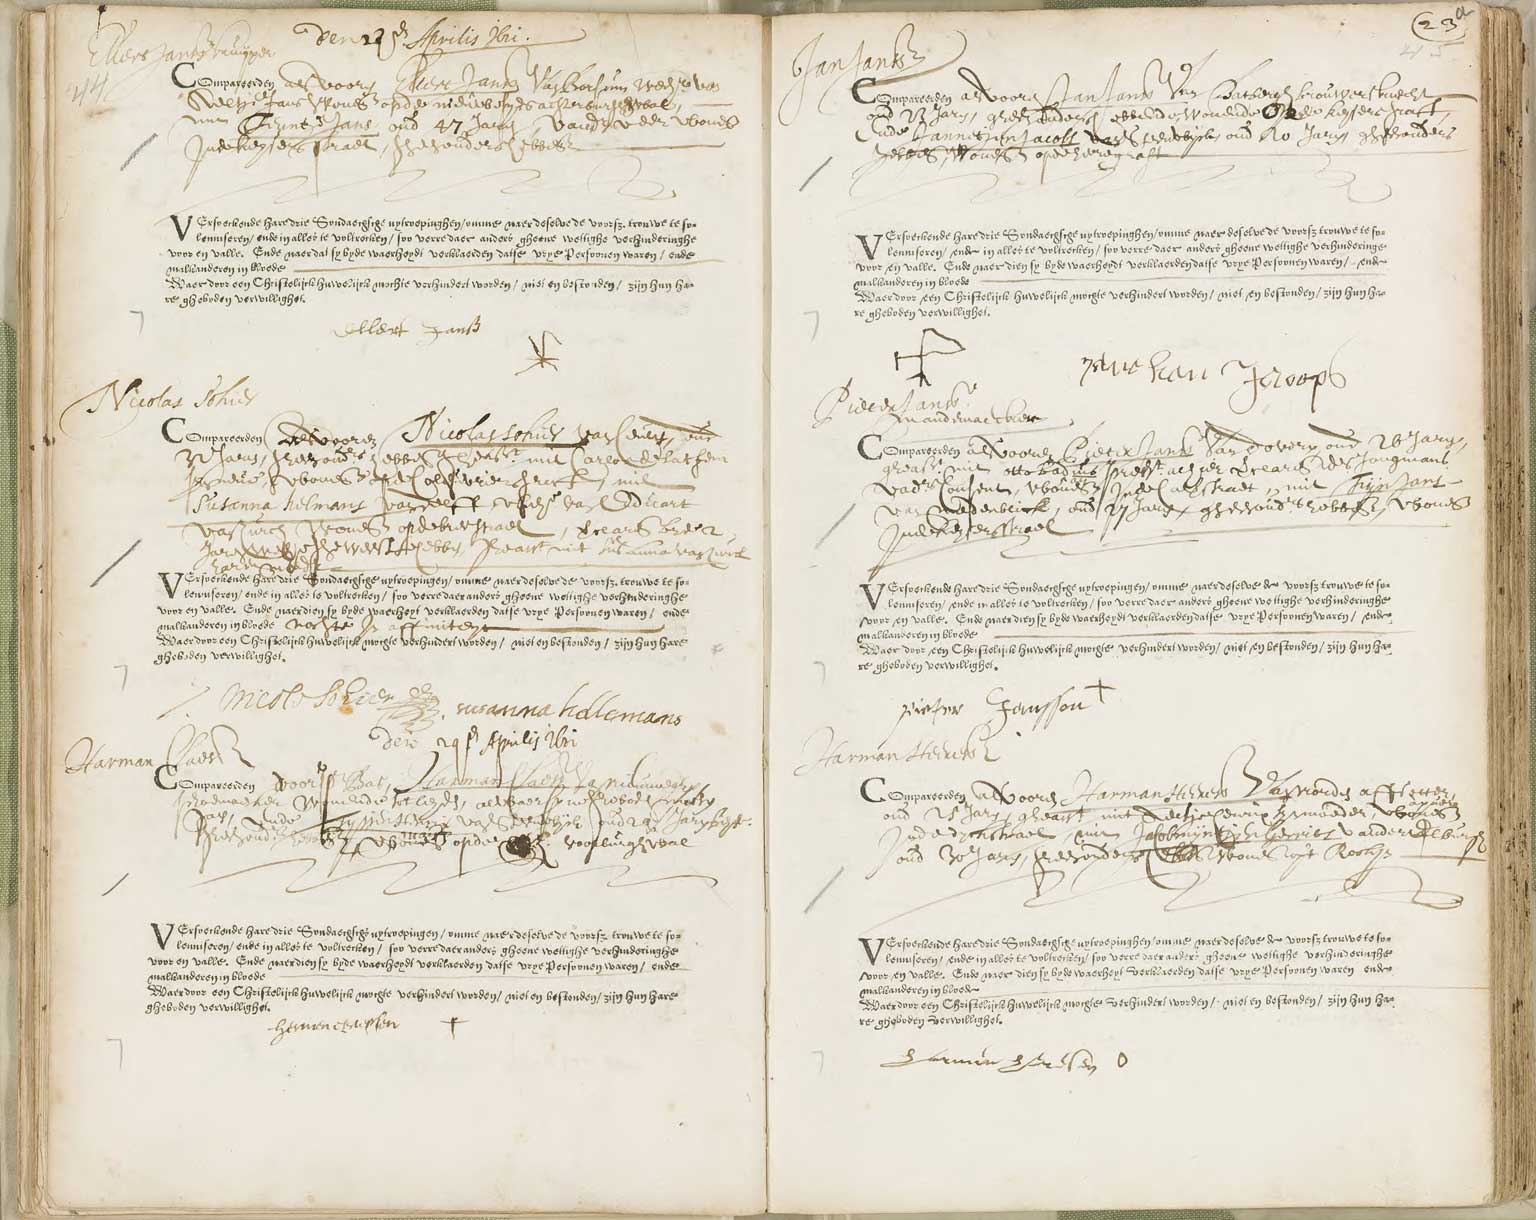 Book with record of betrothal of Nicolaes Sohier and Susanna Hellemans in April 1621, Amsterdam